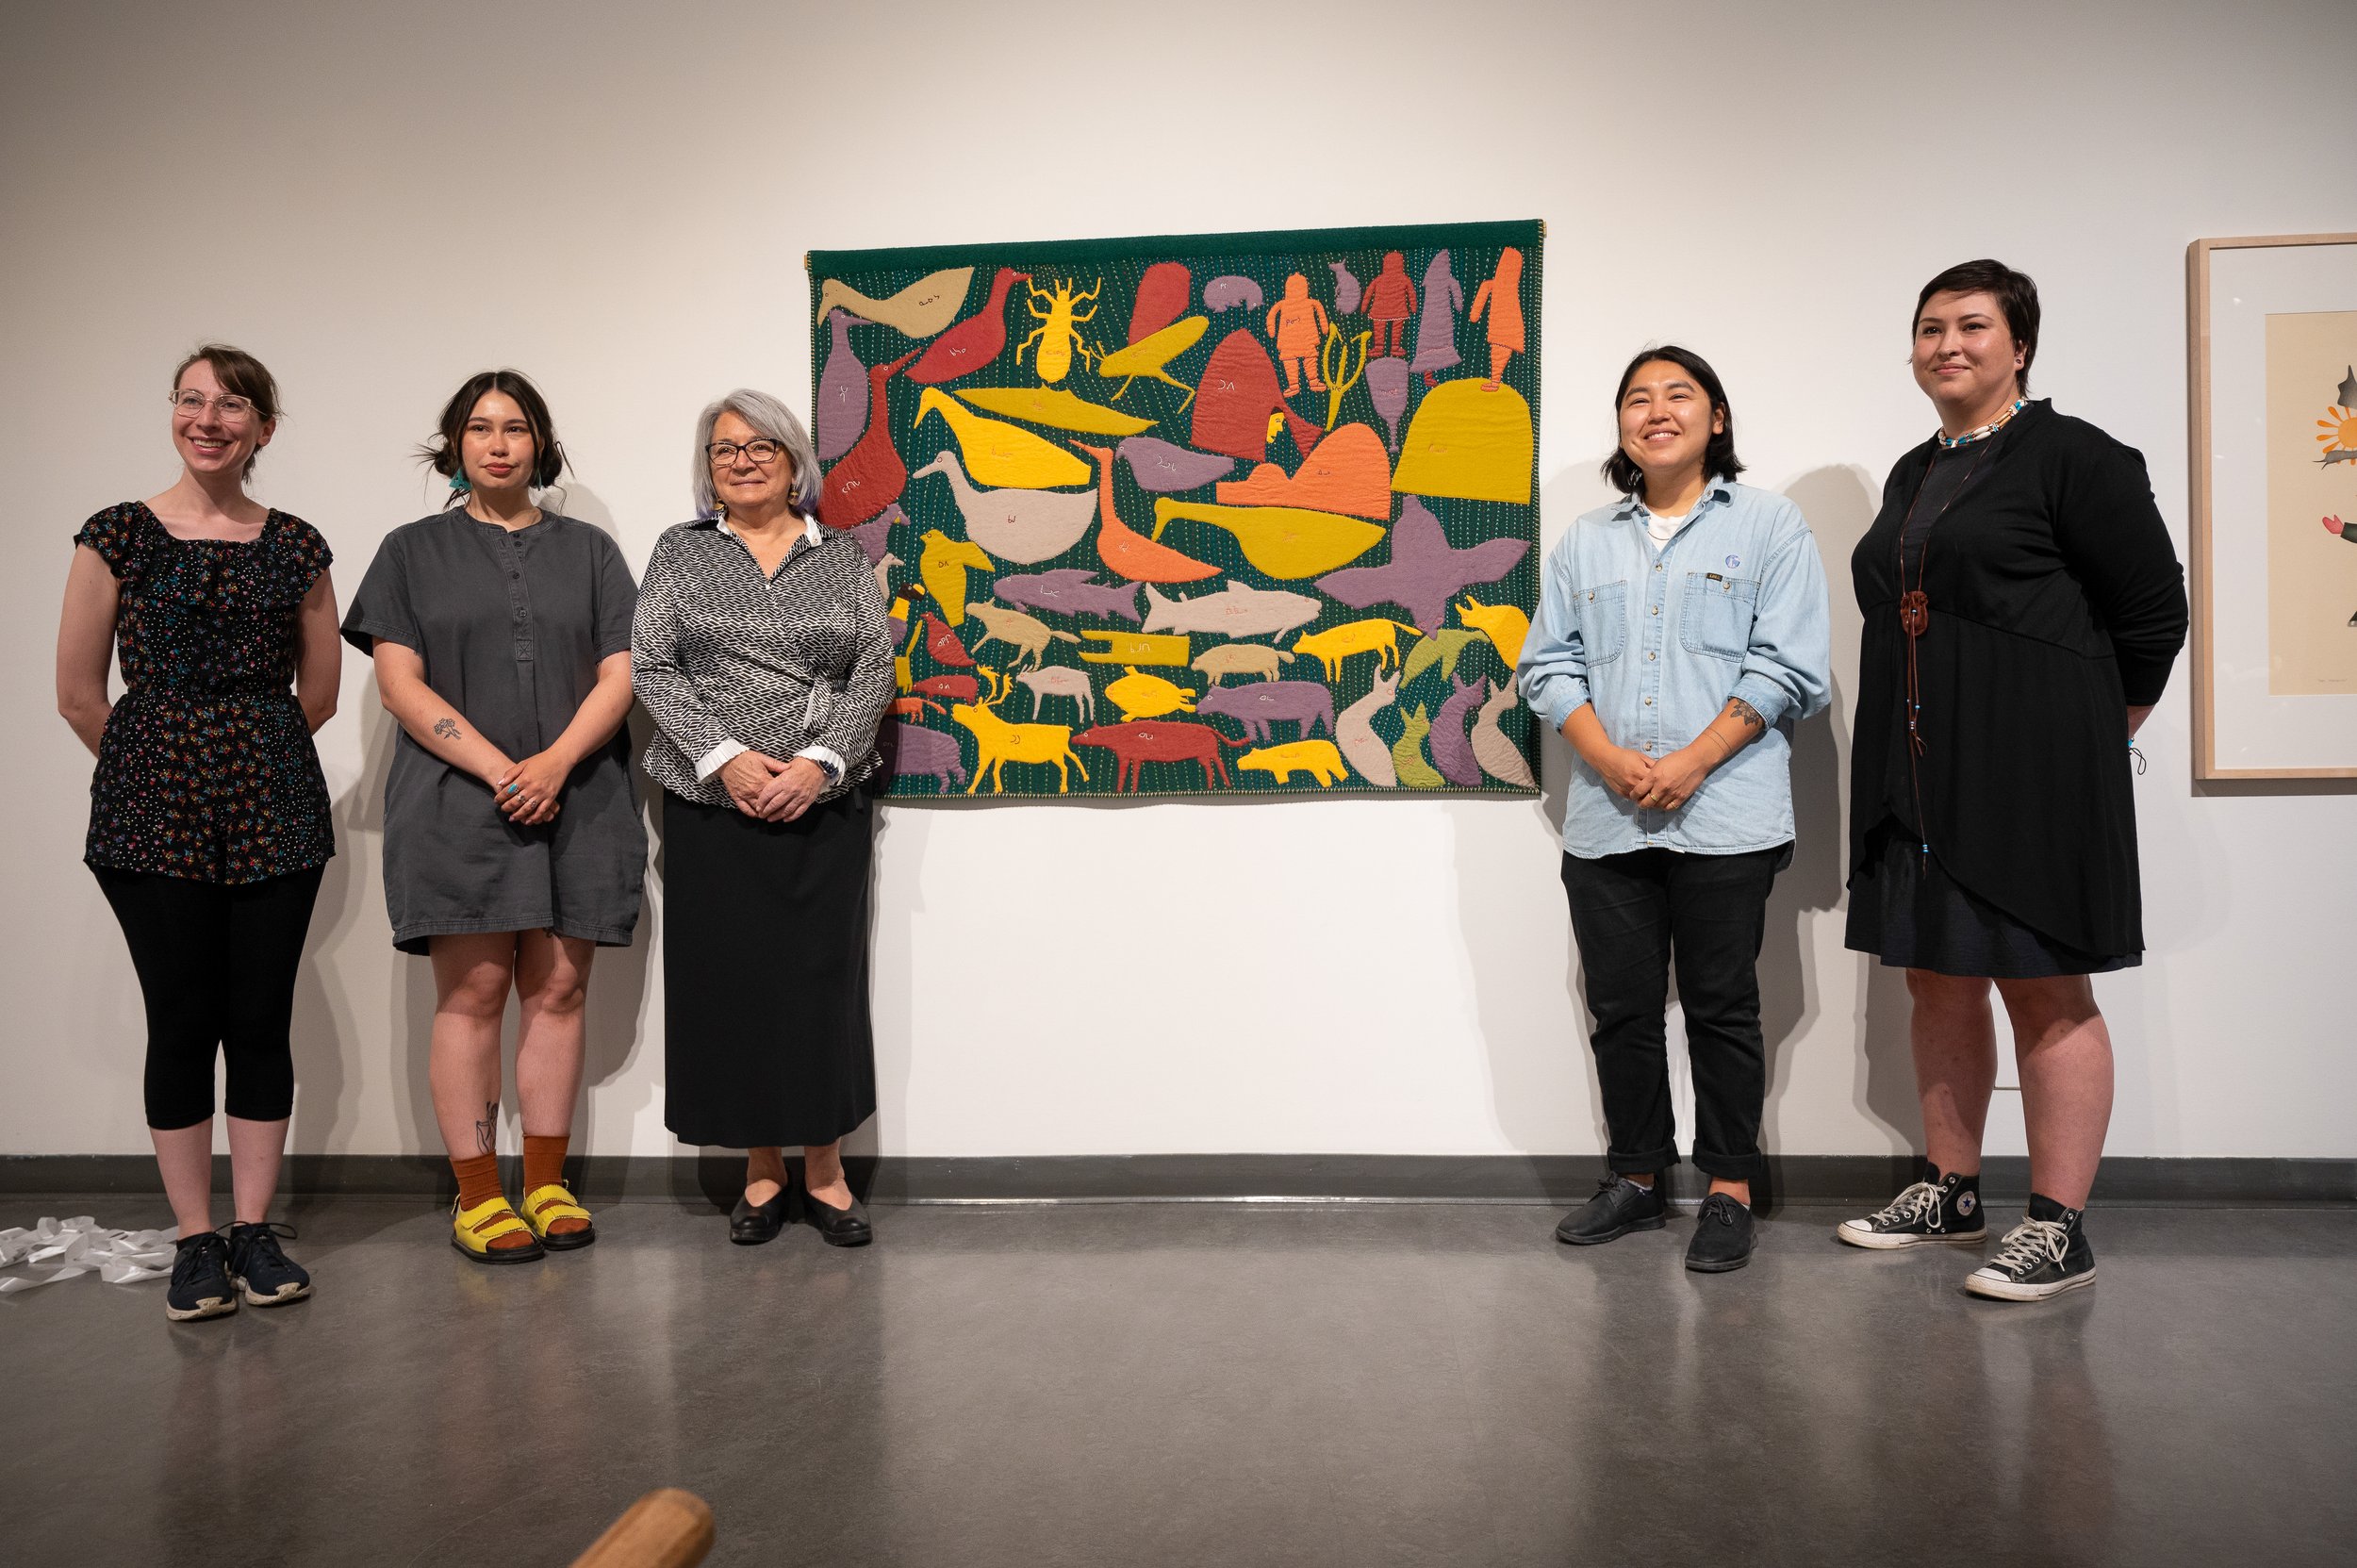   TETHER  co-curators Teresa Vander Meer-Chassé, Leanne Inuarak-Dall, Darcie “Ouiyaghasiak” Bernhardt, and Heather Von Steinhagen, with the Governor General, Her Excellency the Right Honourable Mary Simon, pose in front of a wall hanging by Marion Tu